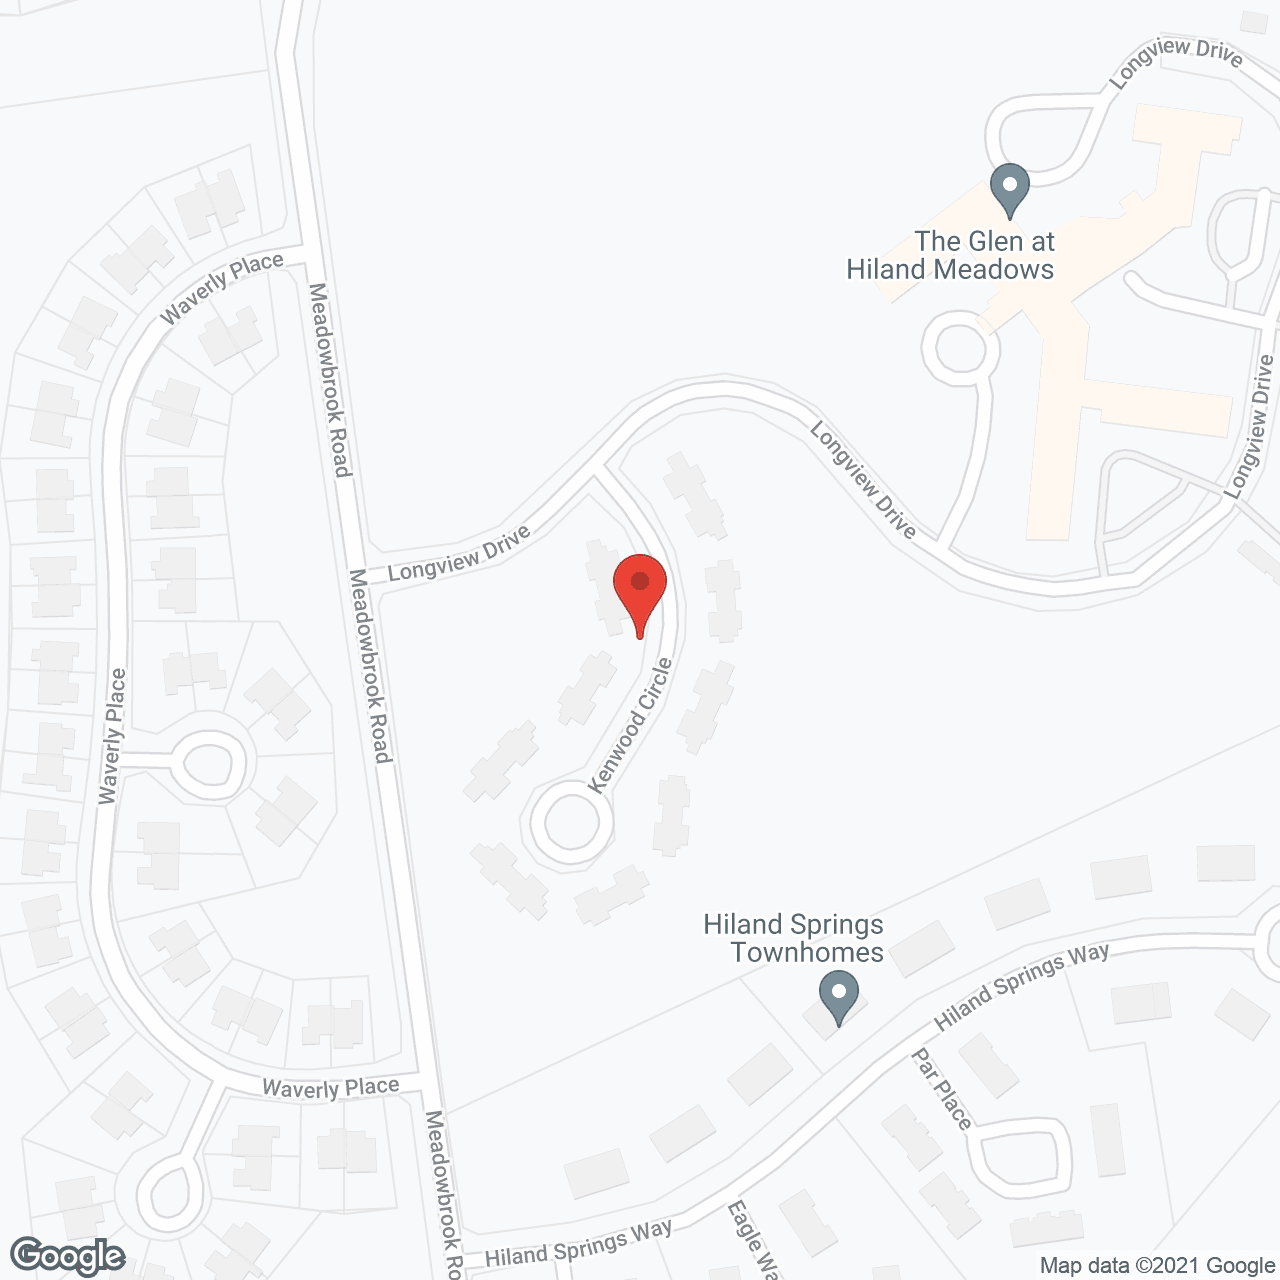 The Glen at Hiland Meadows in google map